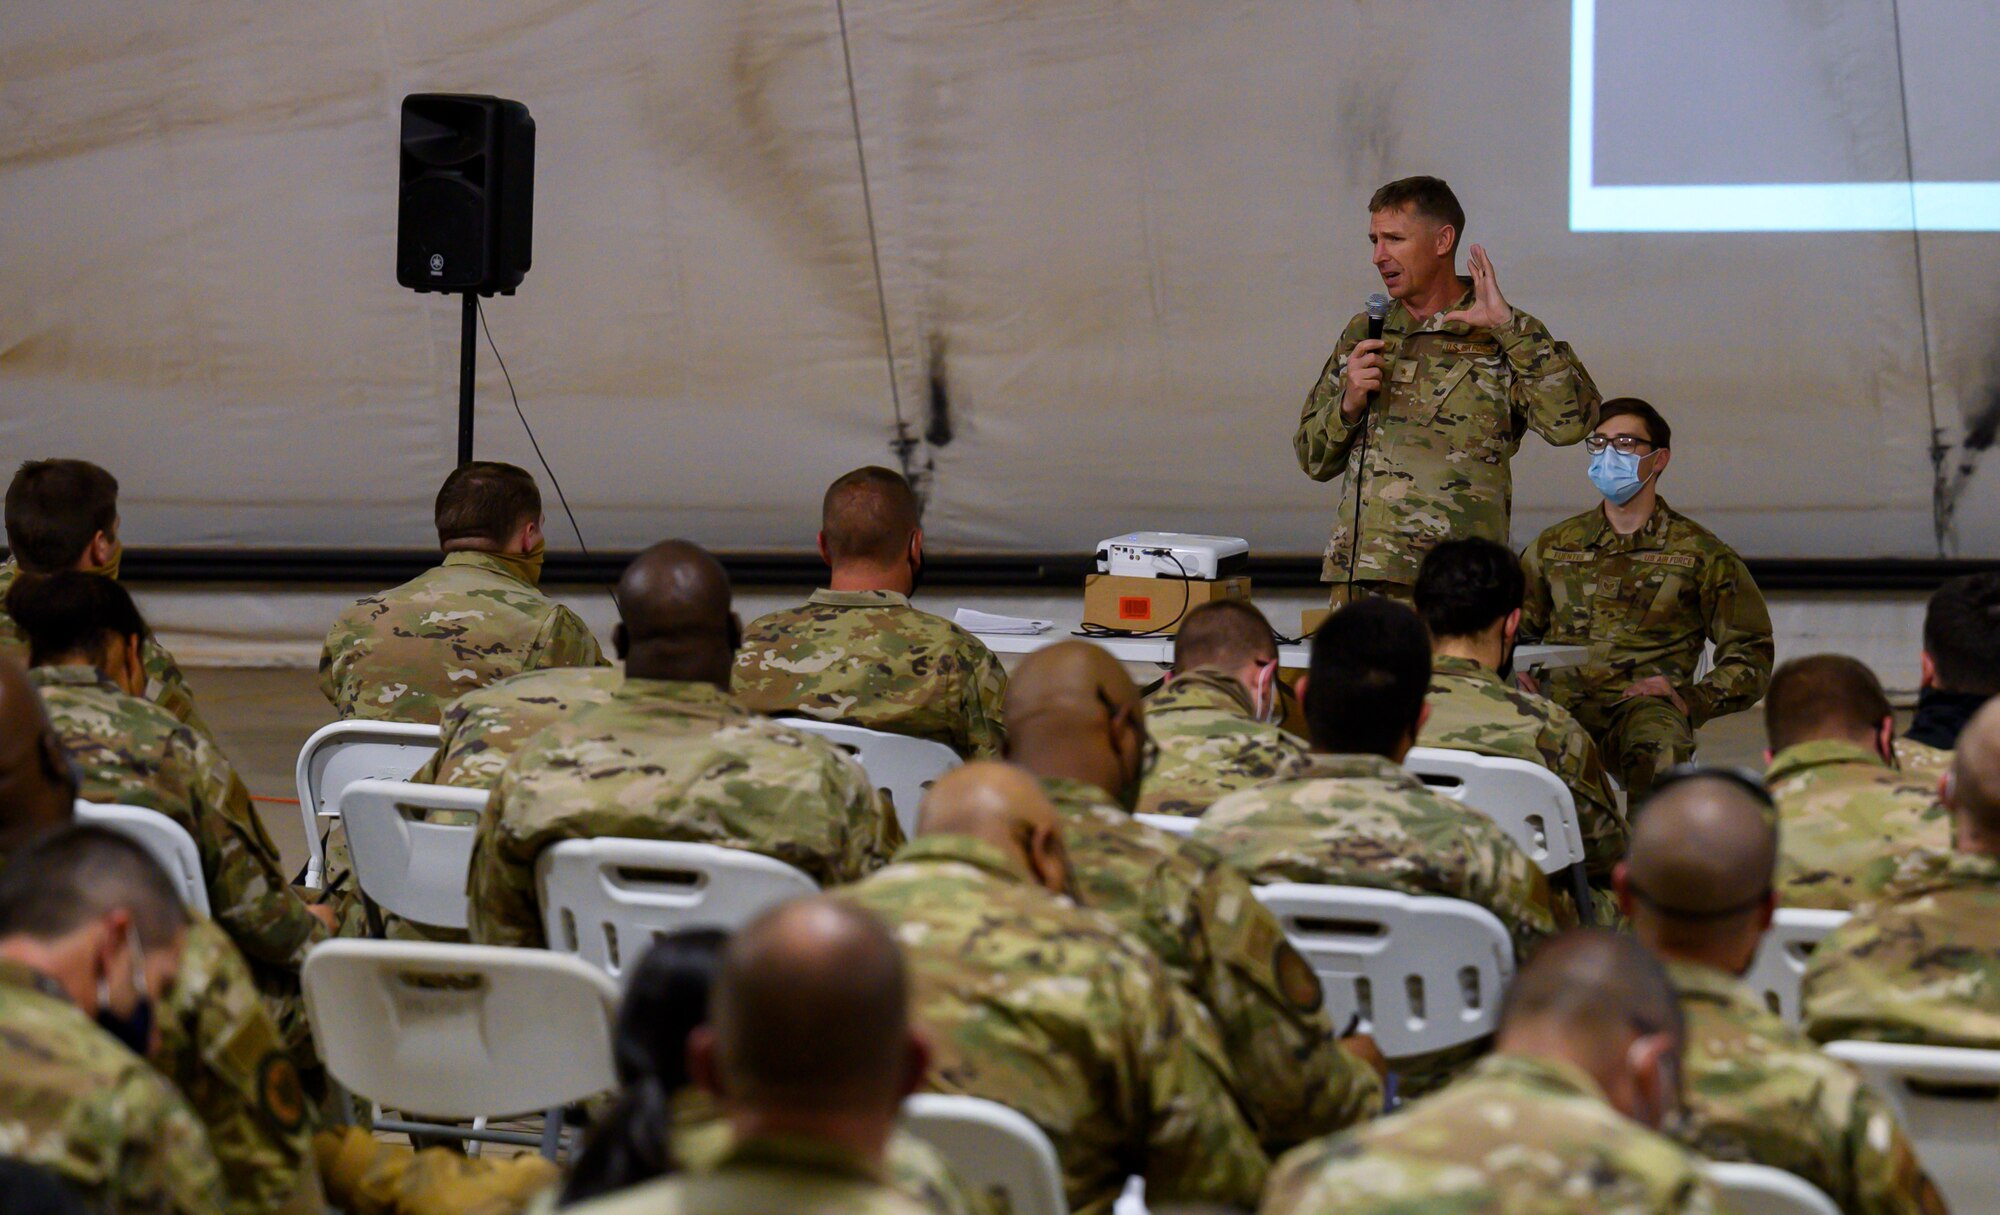 Brig. Gen. Evan Pettus, 378th Air Expeditionary Wing commander, welcomes new members of the wing at Prince Sultan Air Base, Kingdom of Saudi Arabia, April 12, 2021. Airmen from South Carolina Air National Guard’s 169th “Swamp Fox” Fighter Wing have been deployed to PSAB to help bolster the defensive capabilities against potential threats in the region. (U.S. Air Force Photo by Senior Airman Samuel Earick)